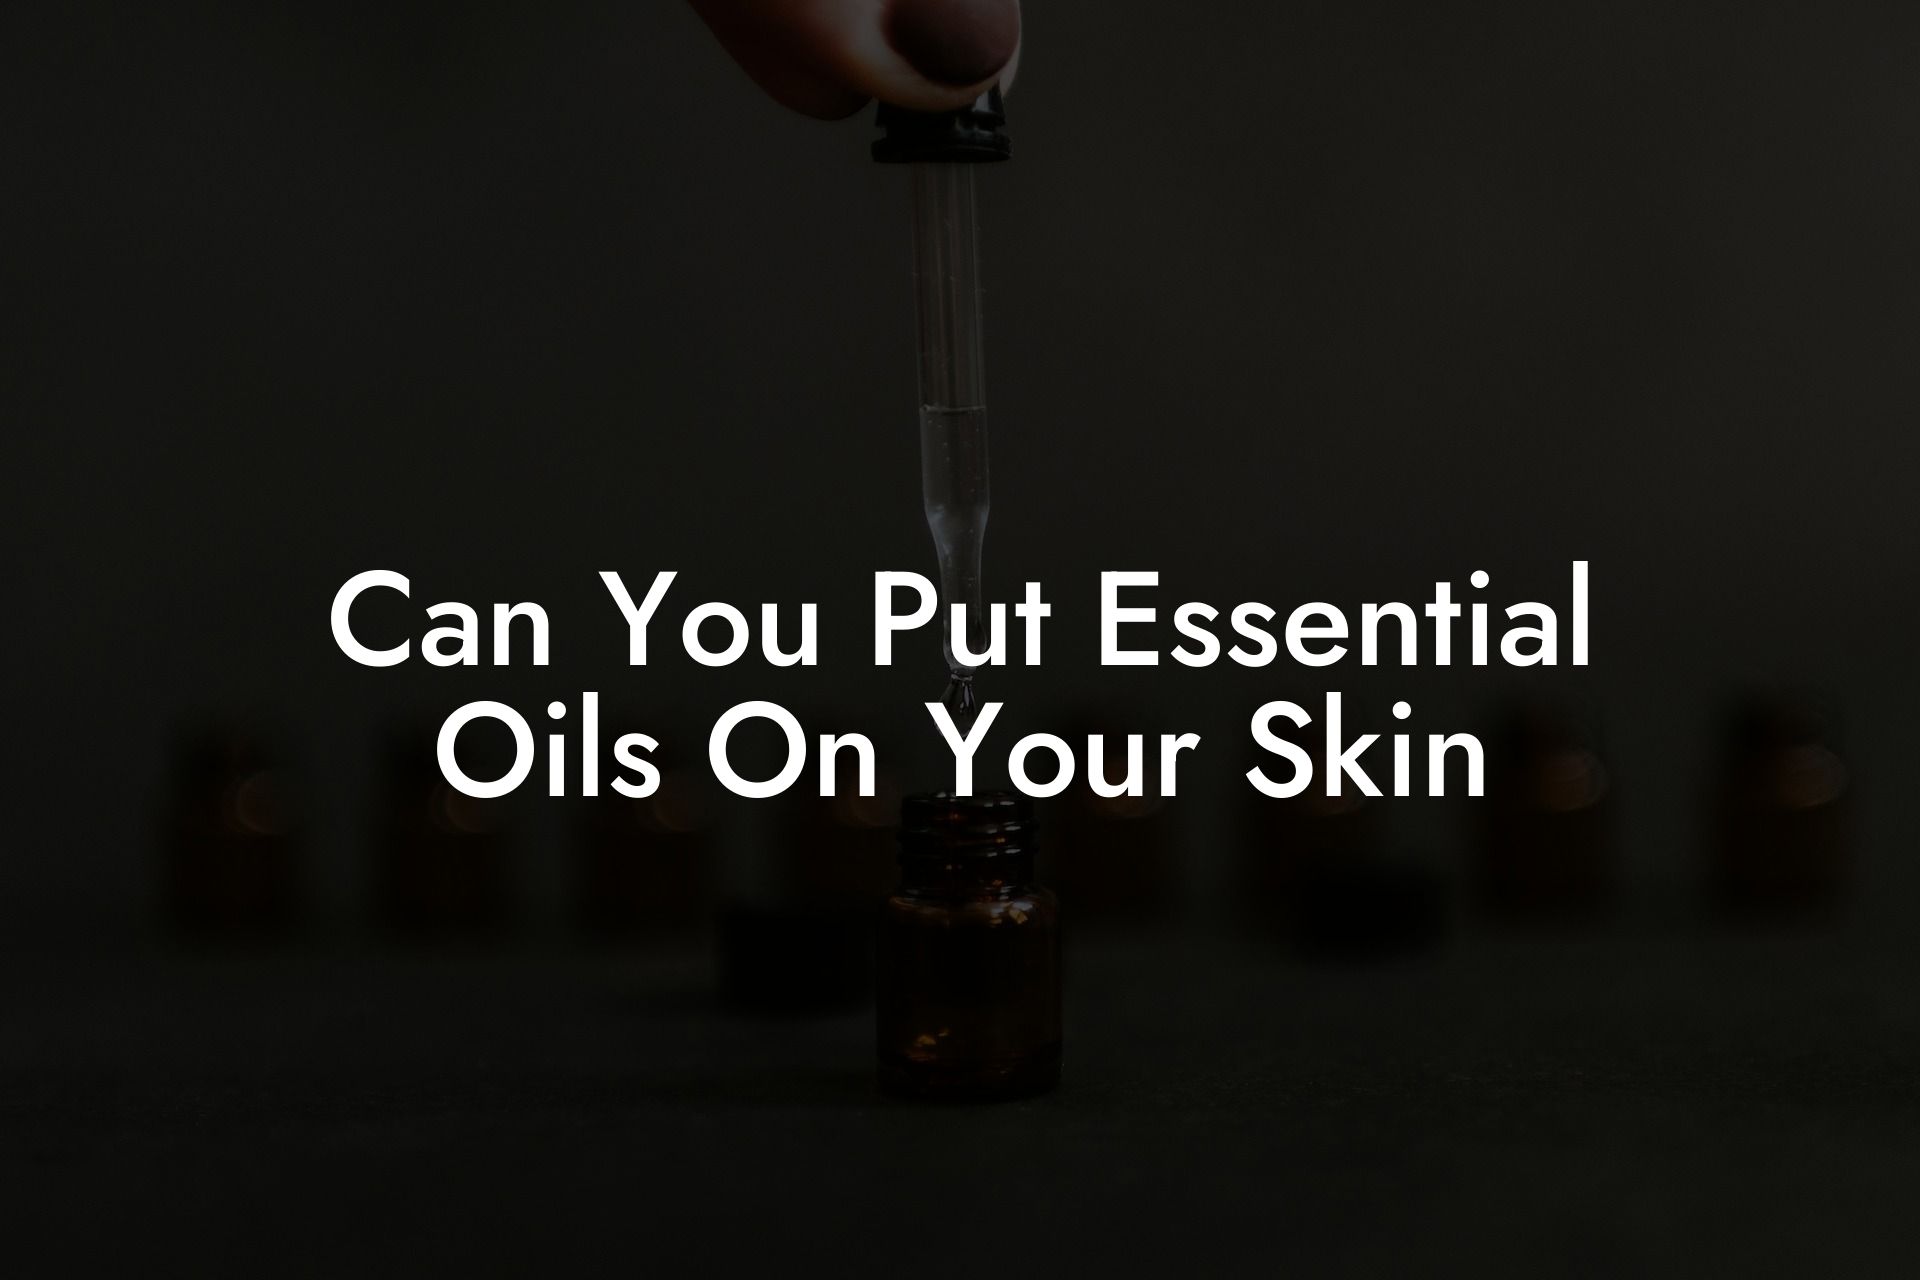 Can You Put Essential Oils On Your Skin